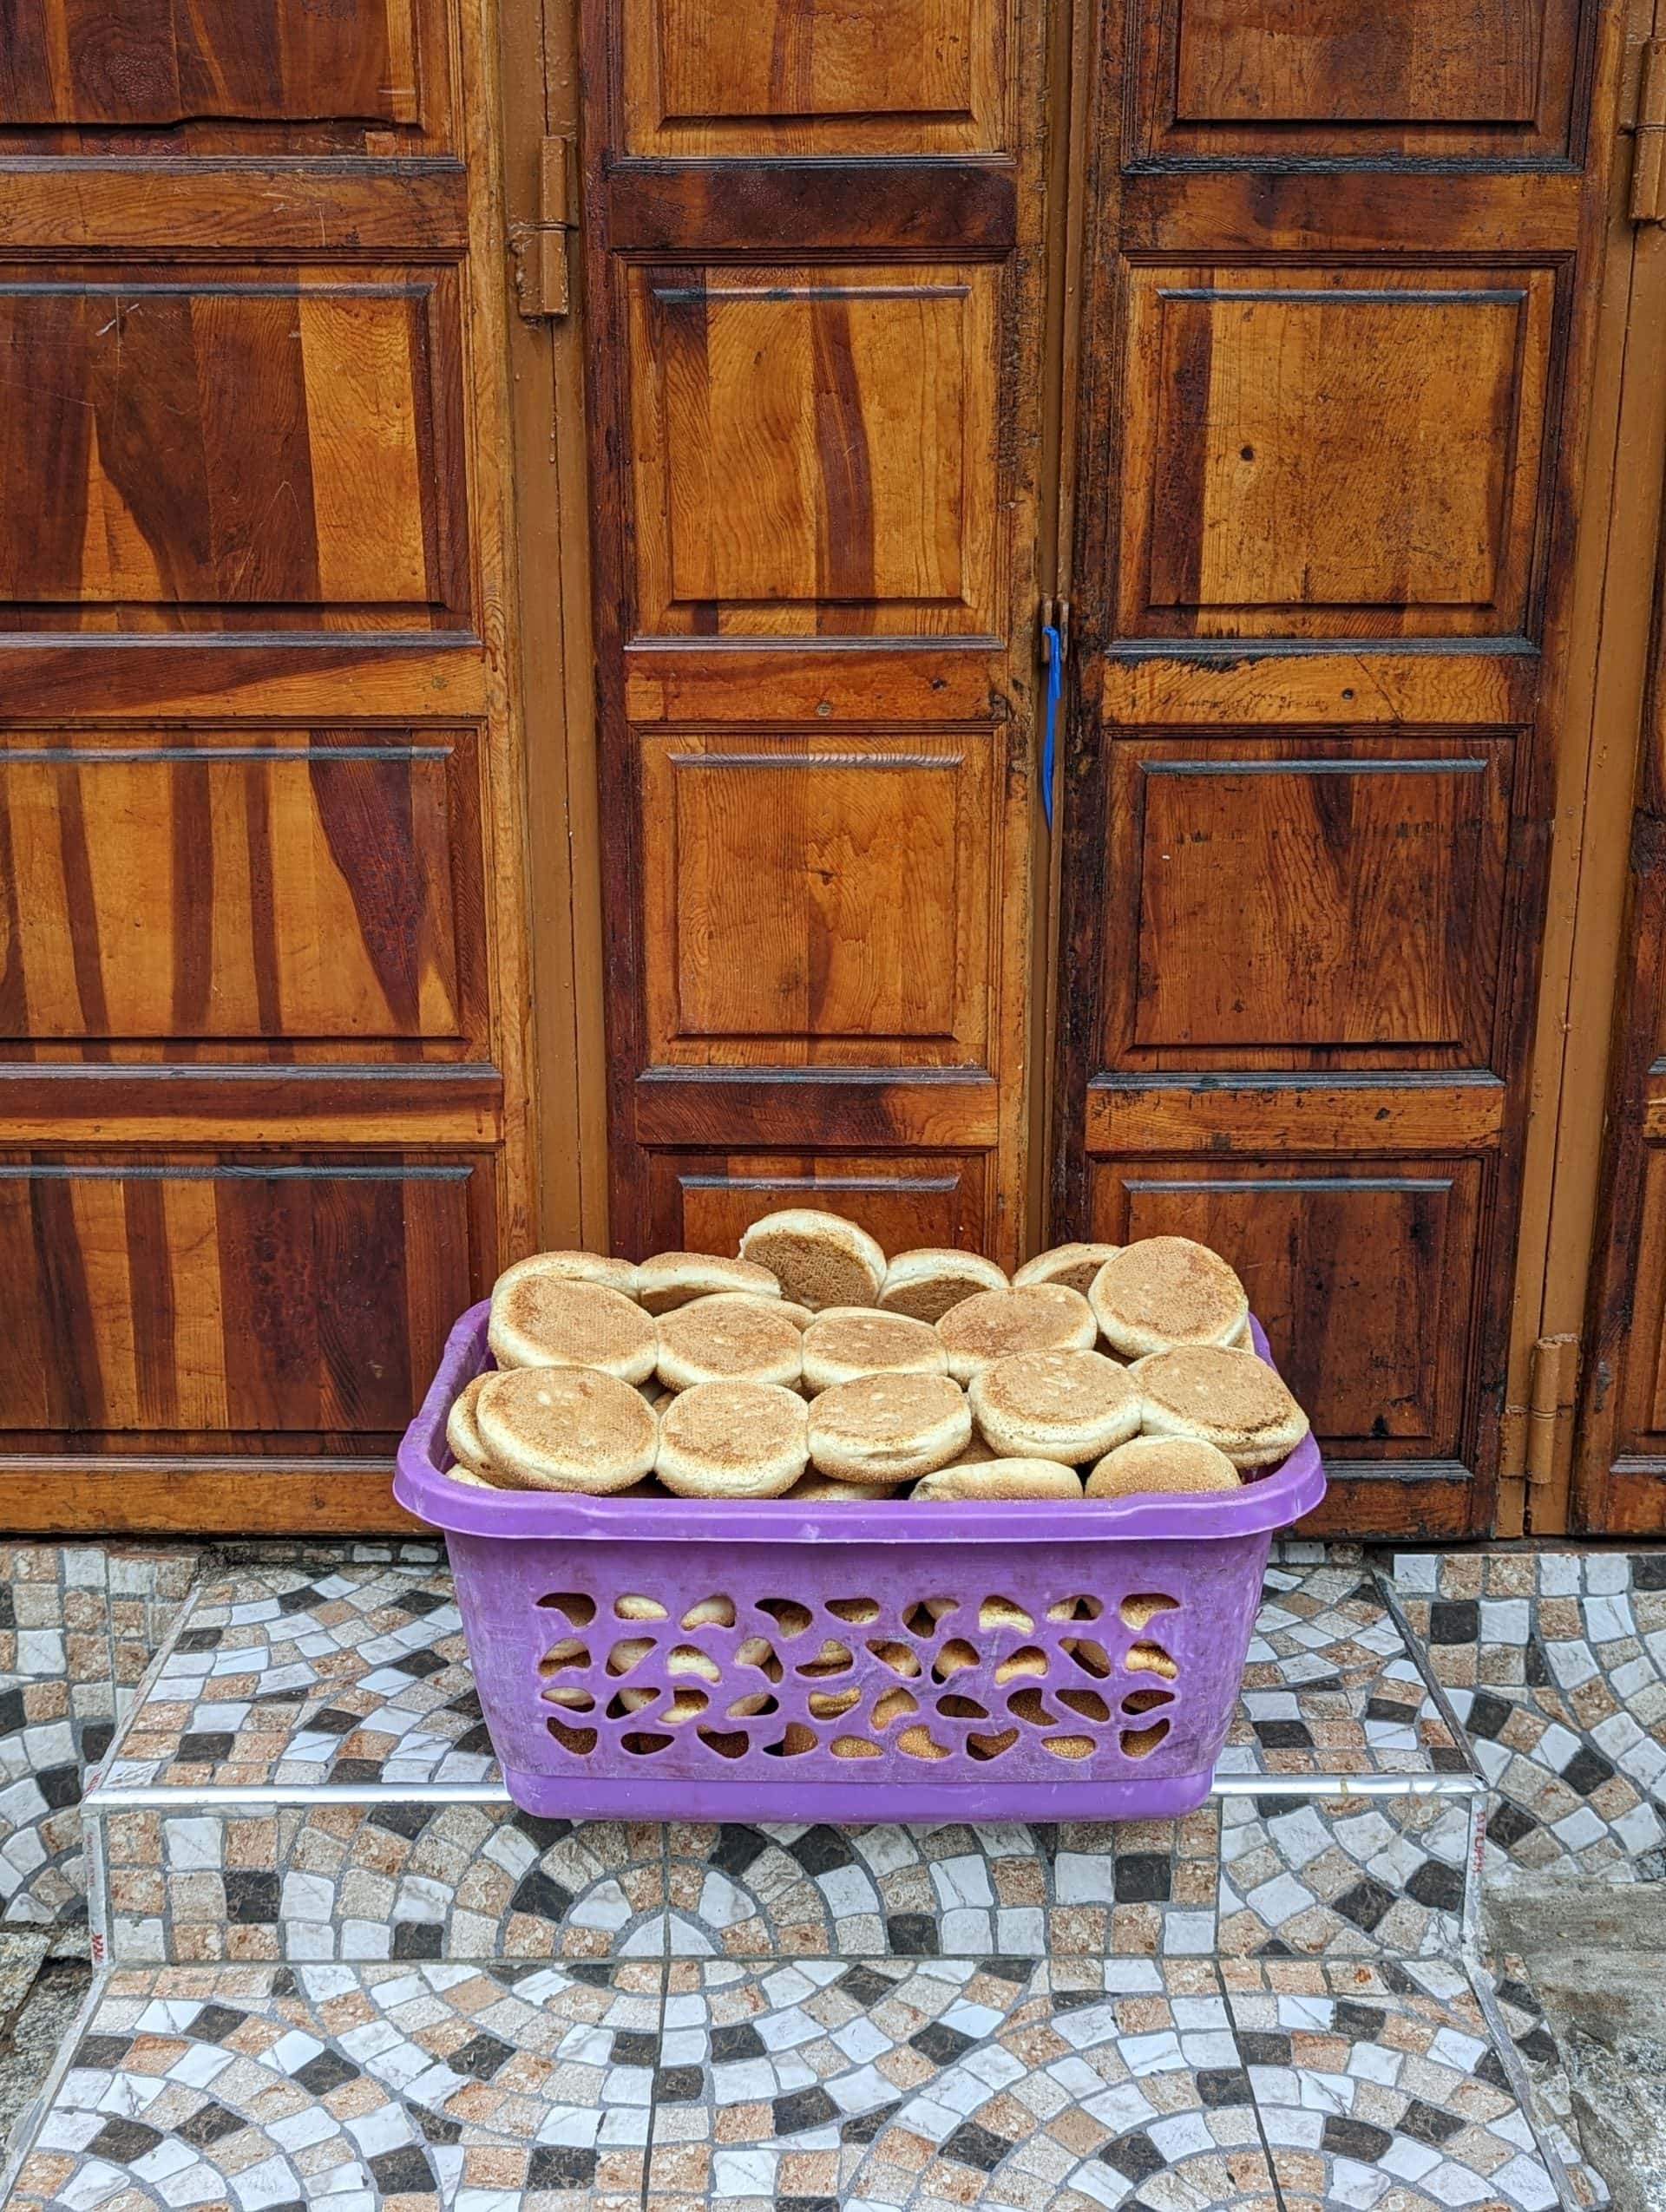 Delivering the breads of Morocco.